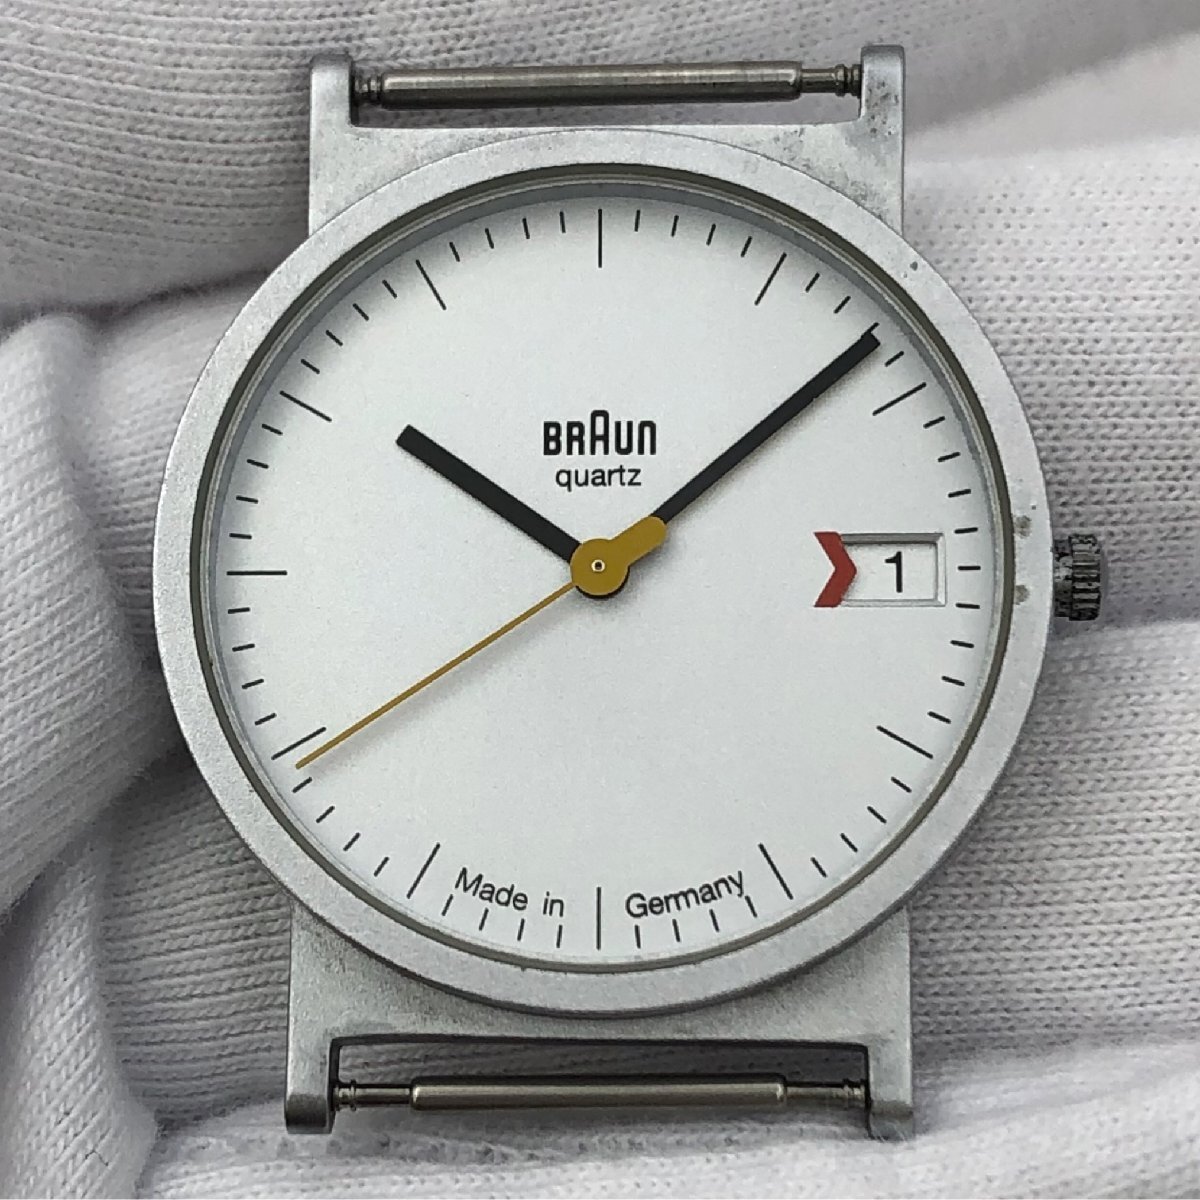 1 jpy ~/BRAUN/ Brown /3 802/Made in Germany/ 3 hands / Date / silver face / silver color / round / quartz / men's wristwatch / Junk /T135